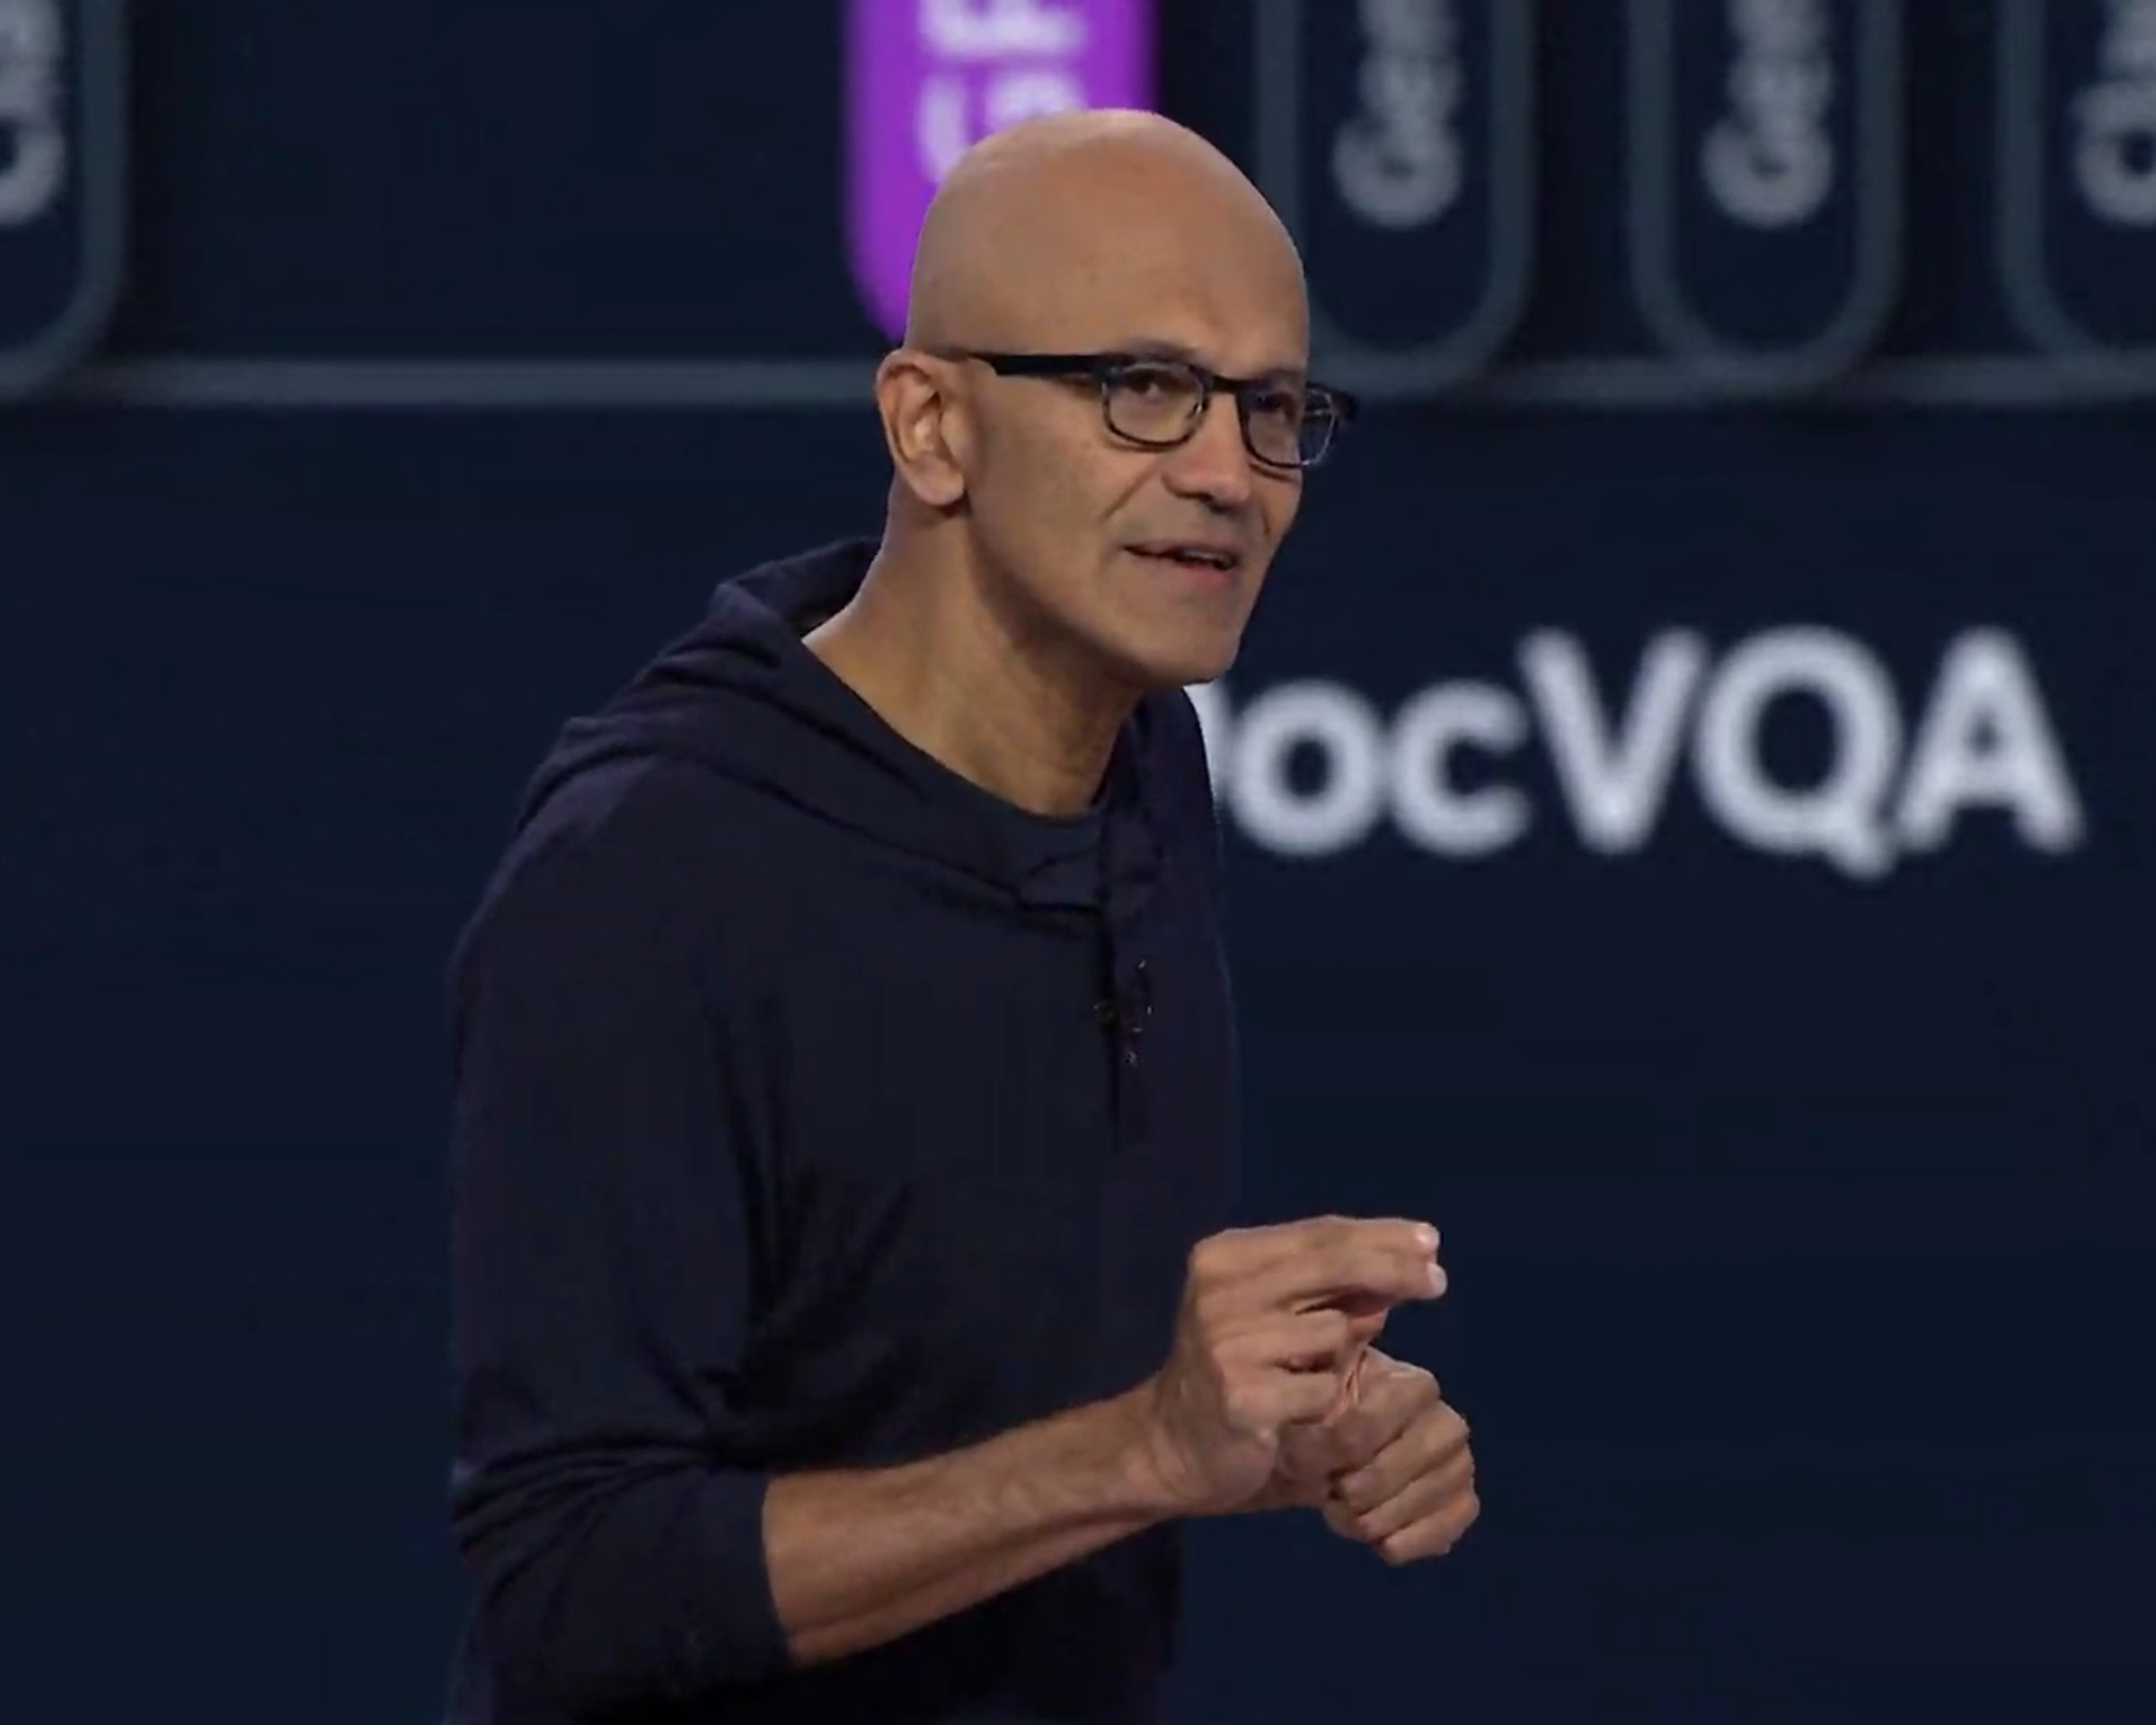 A picture of Microsoft CEO Satya Nadella speaking.